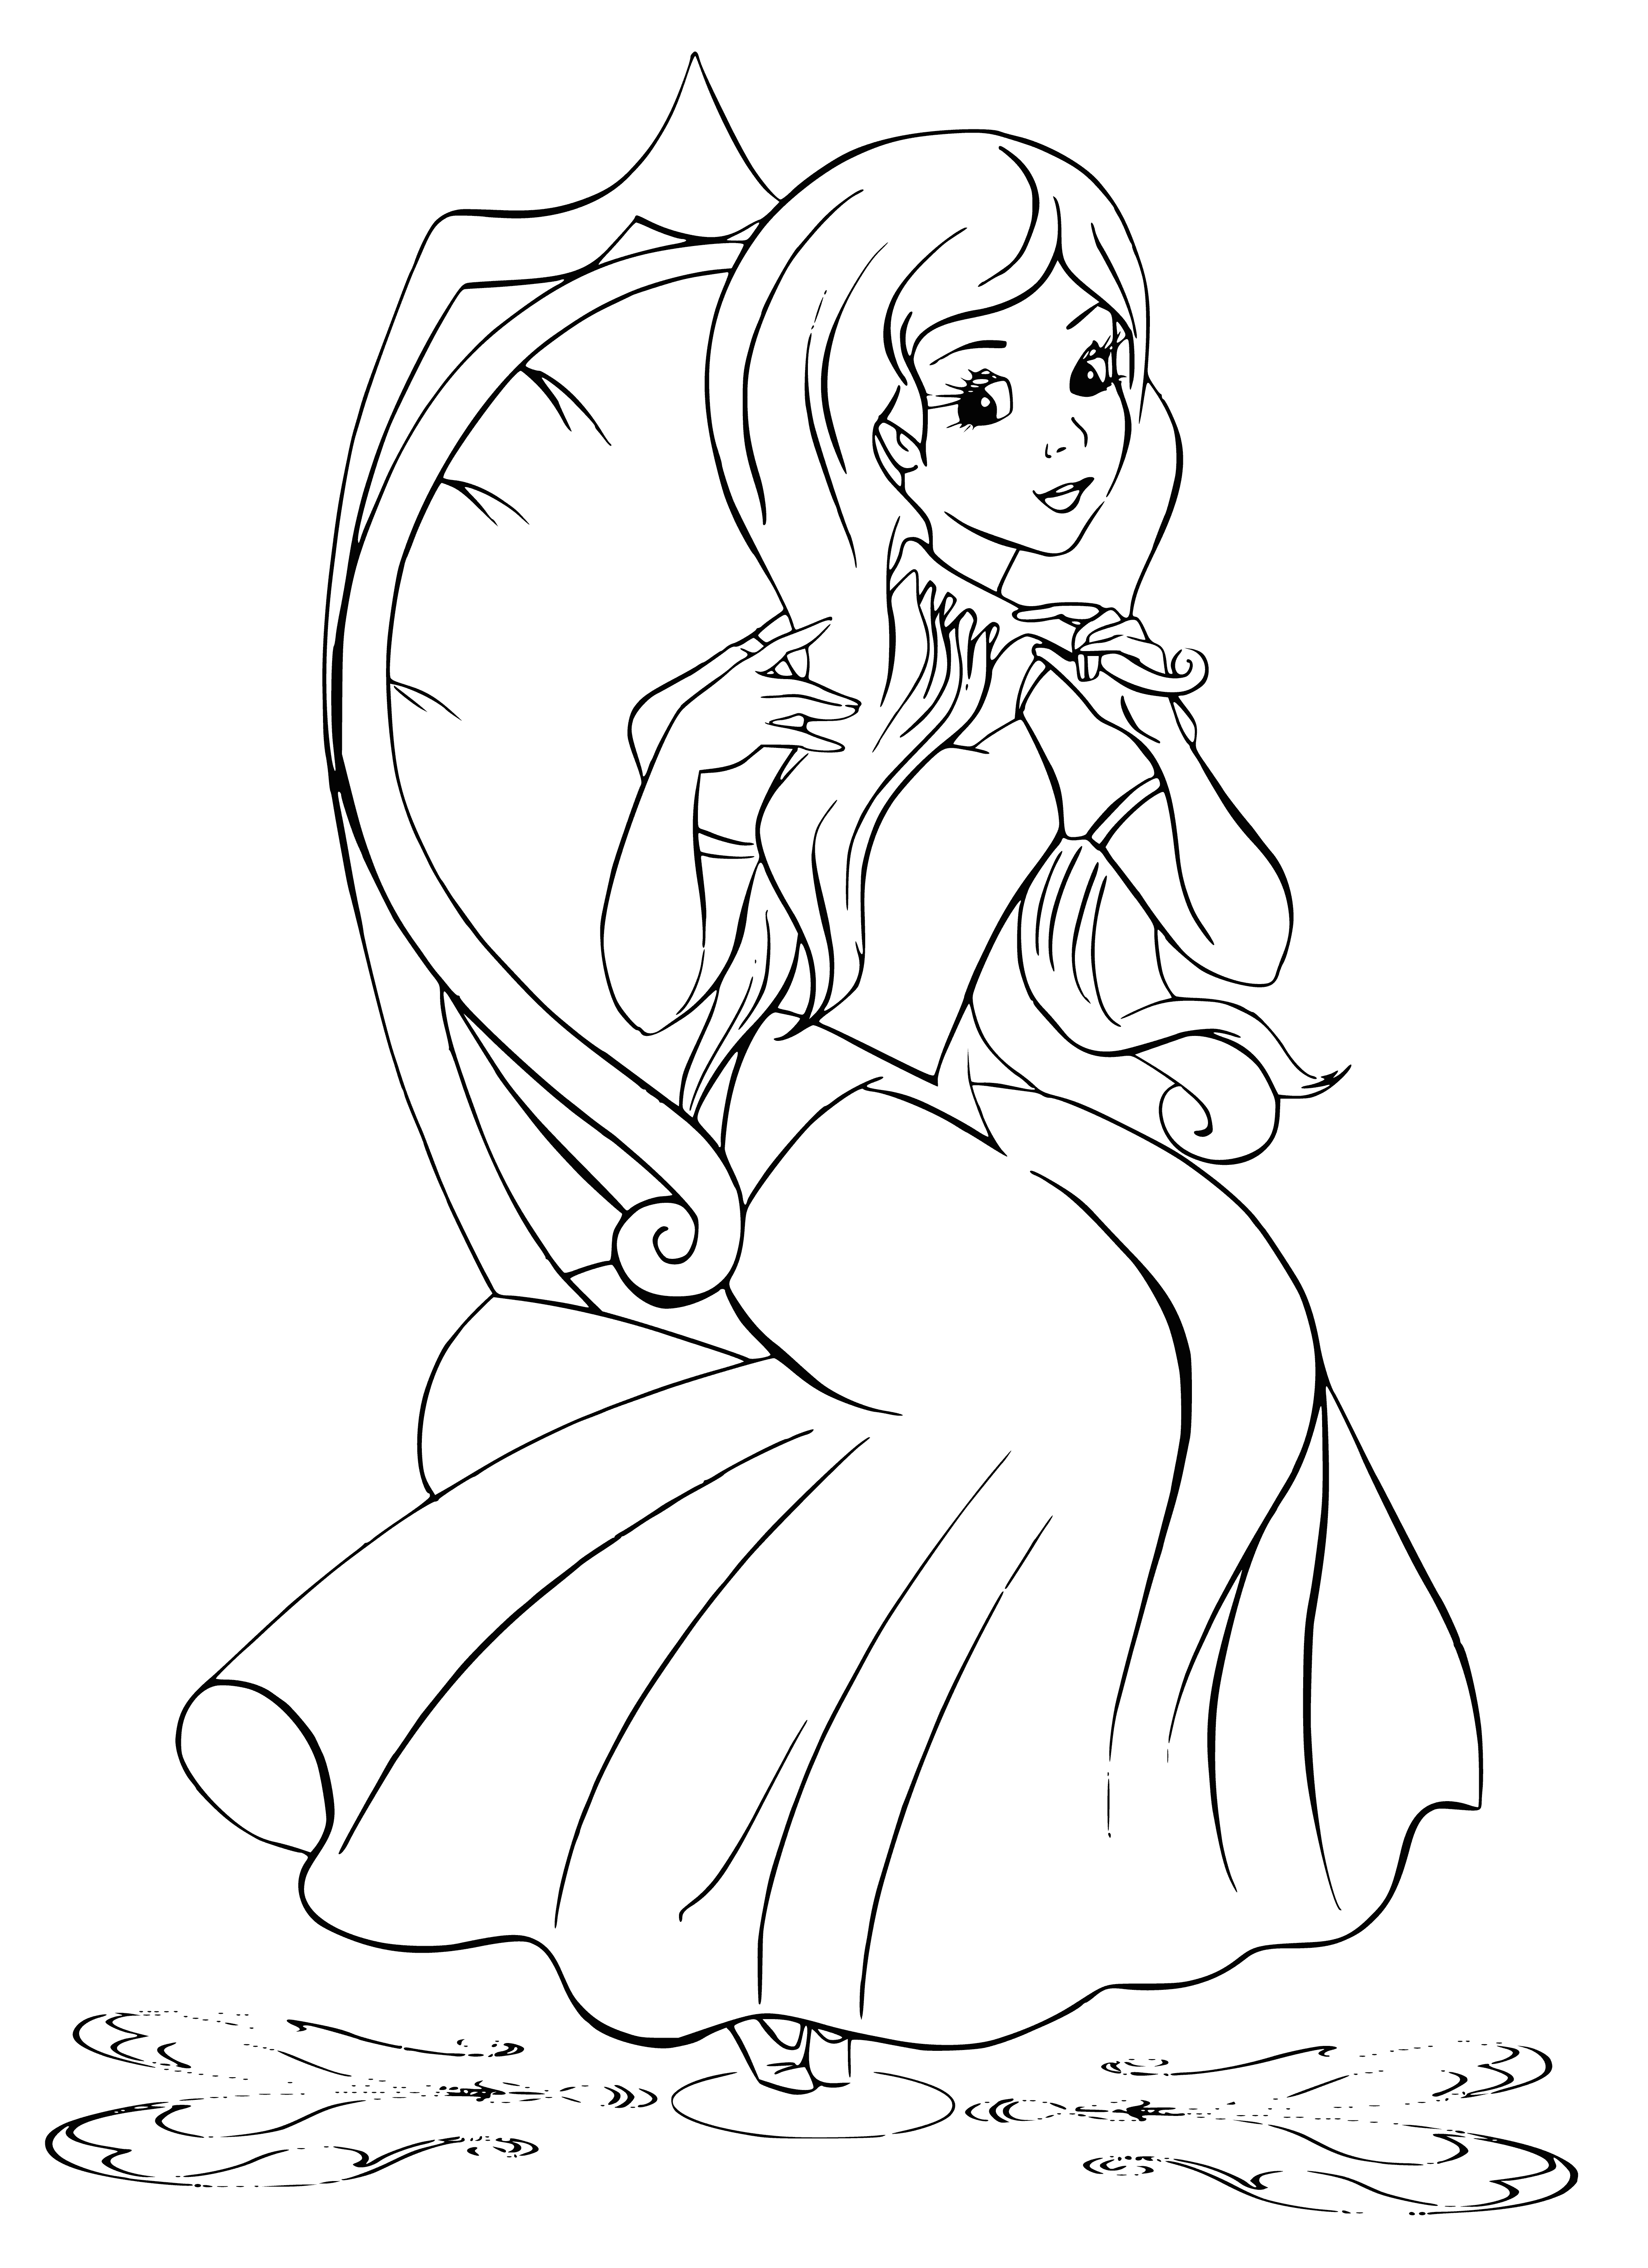 coloring page: Young princess combs her hair wearing white dress w/ blue sash & golden crown. #FairyTale